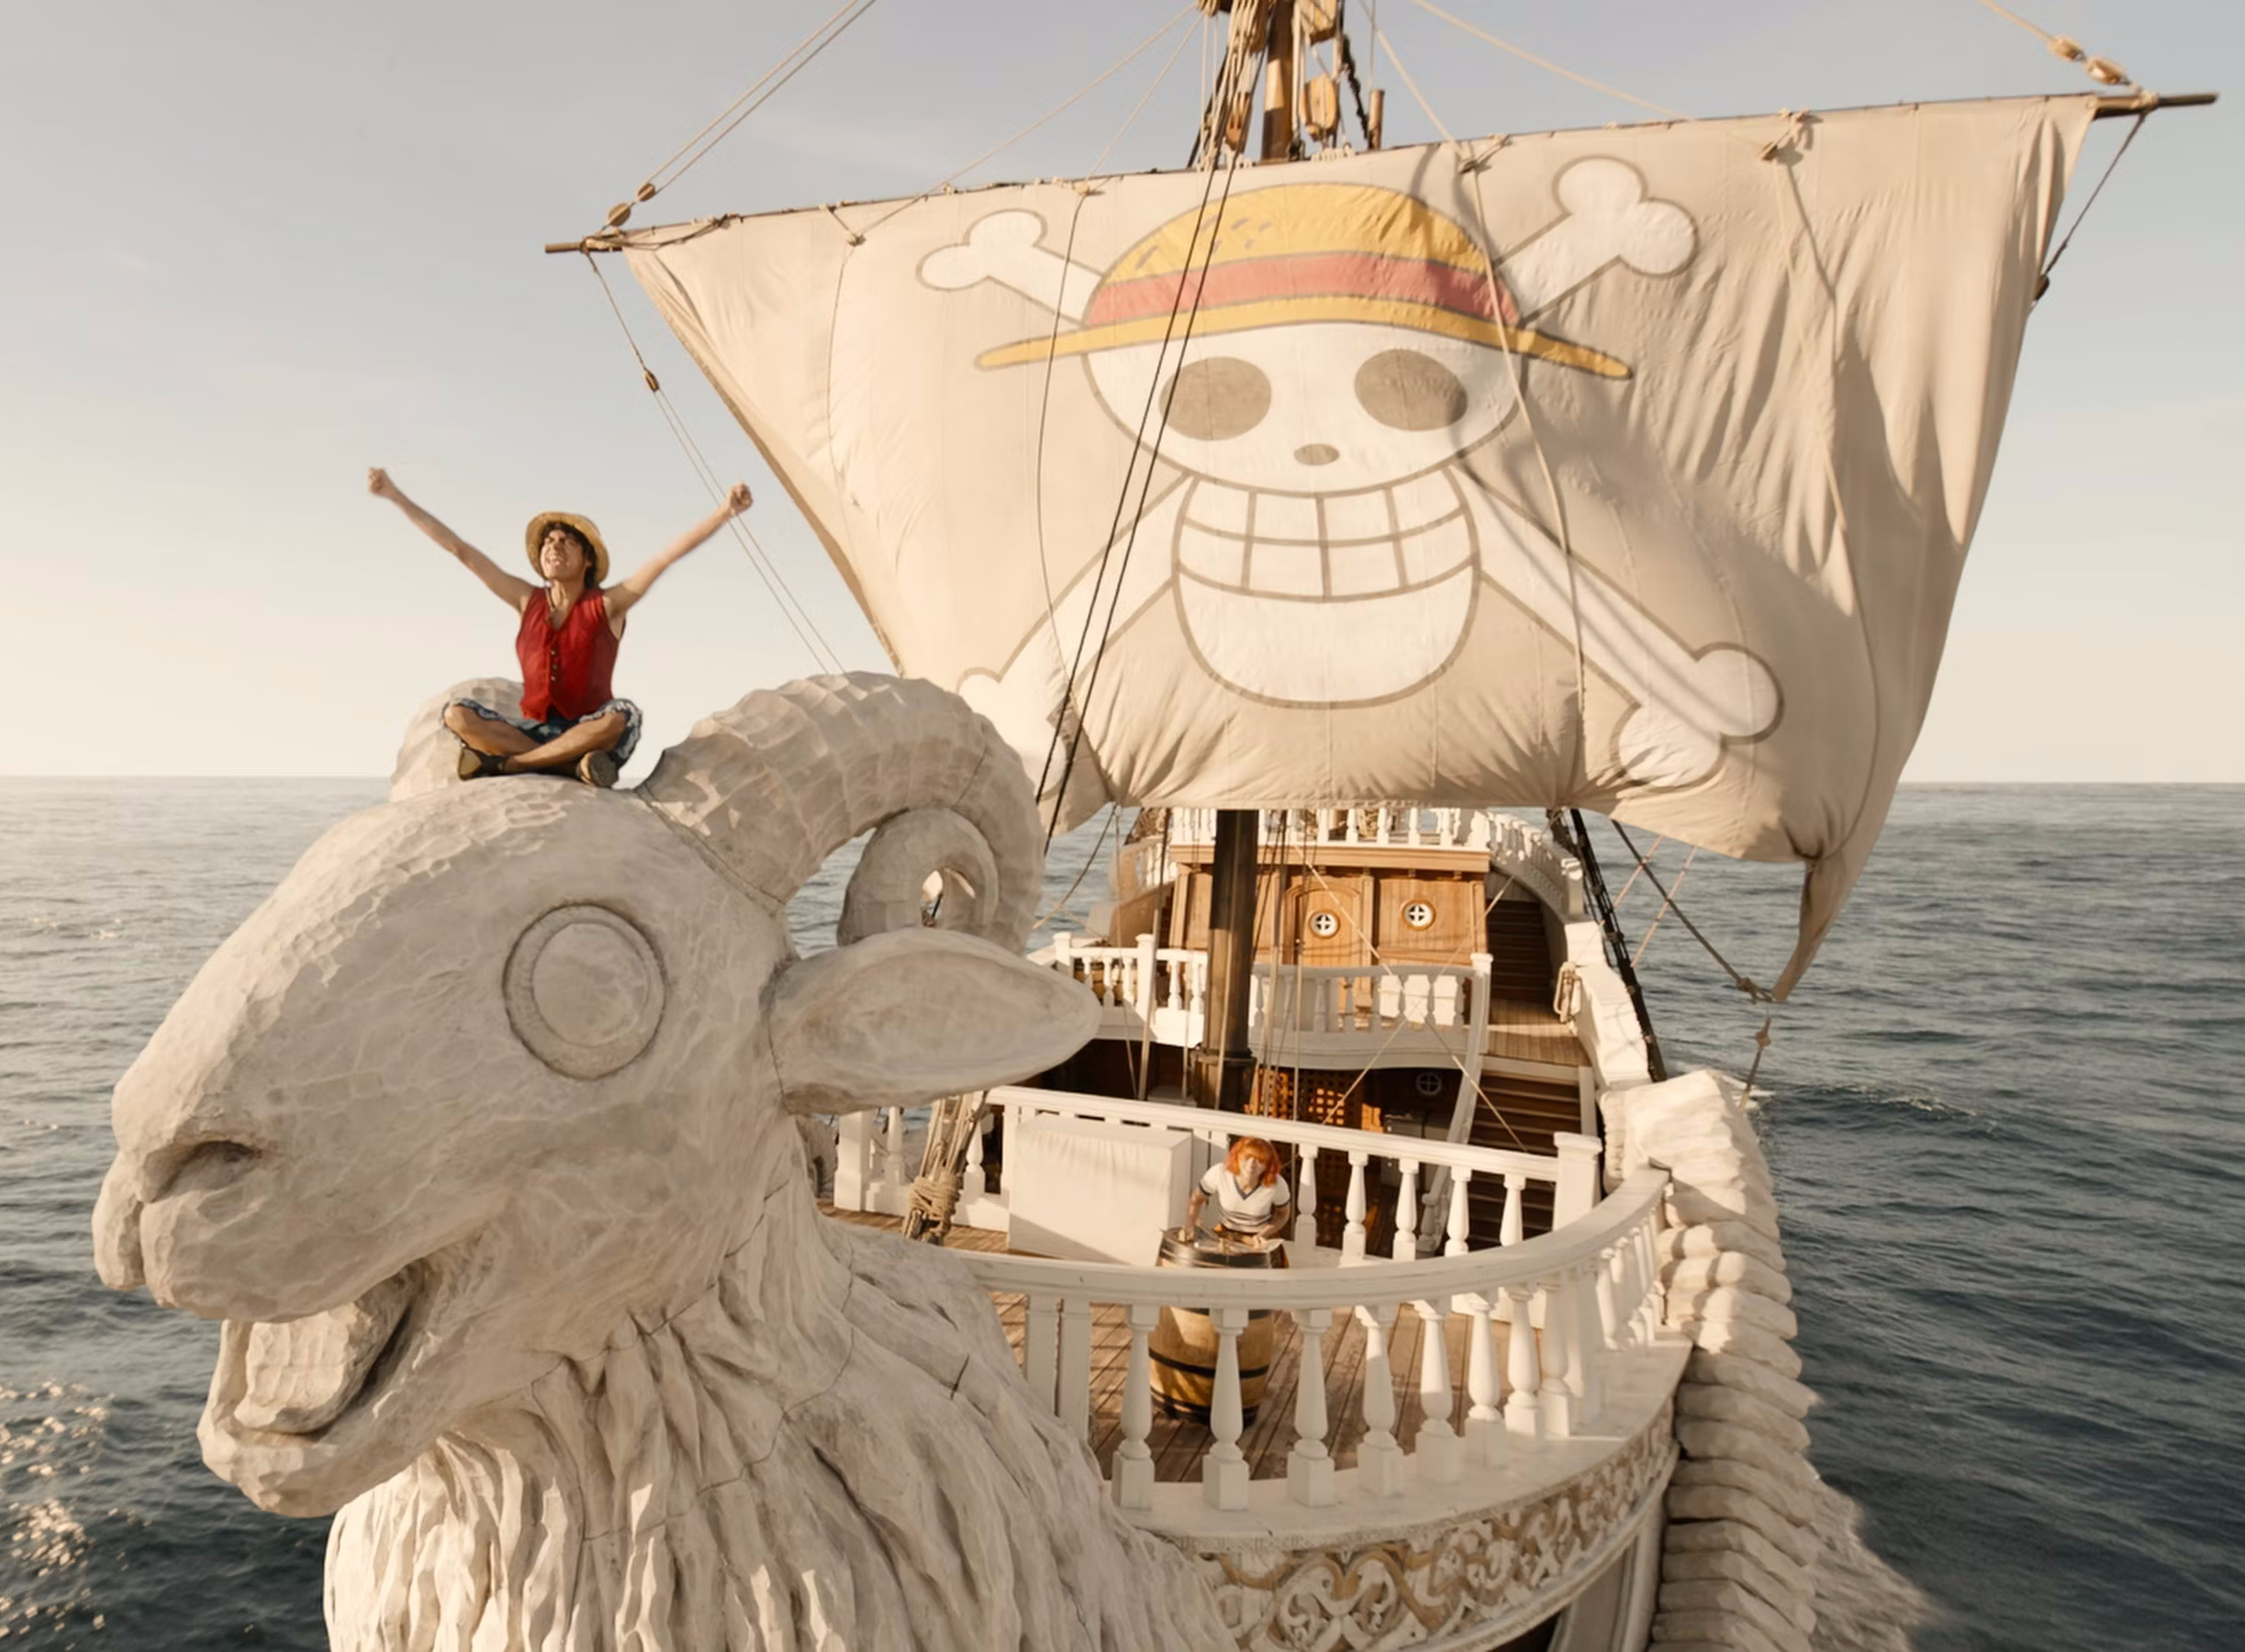 One Piece: The Going Merry Is Proven to Be Sentient